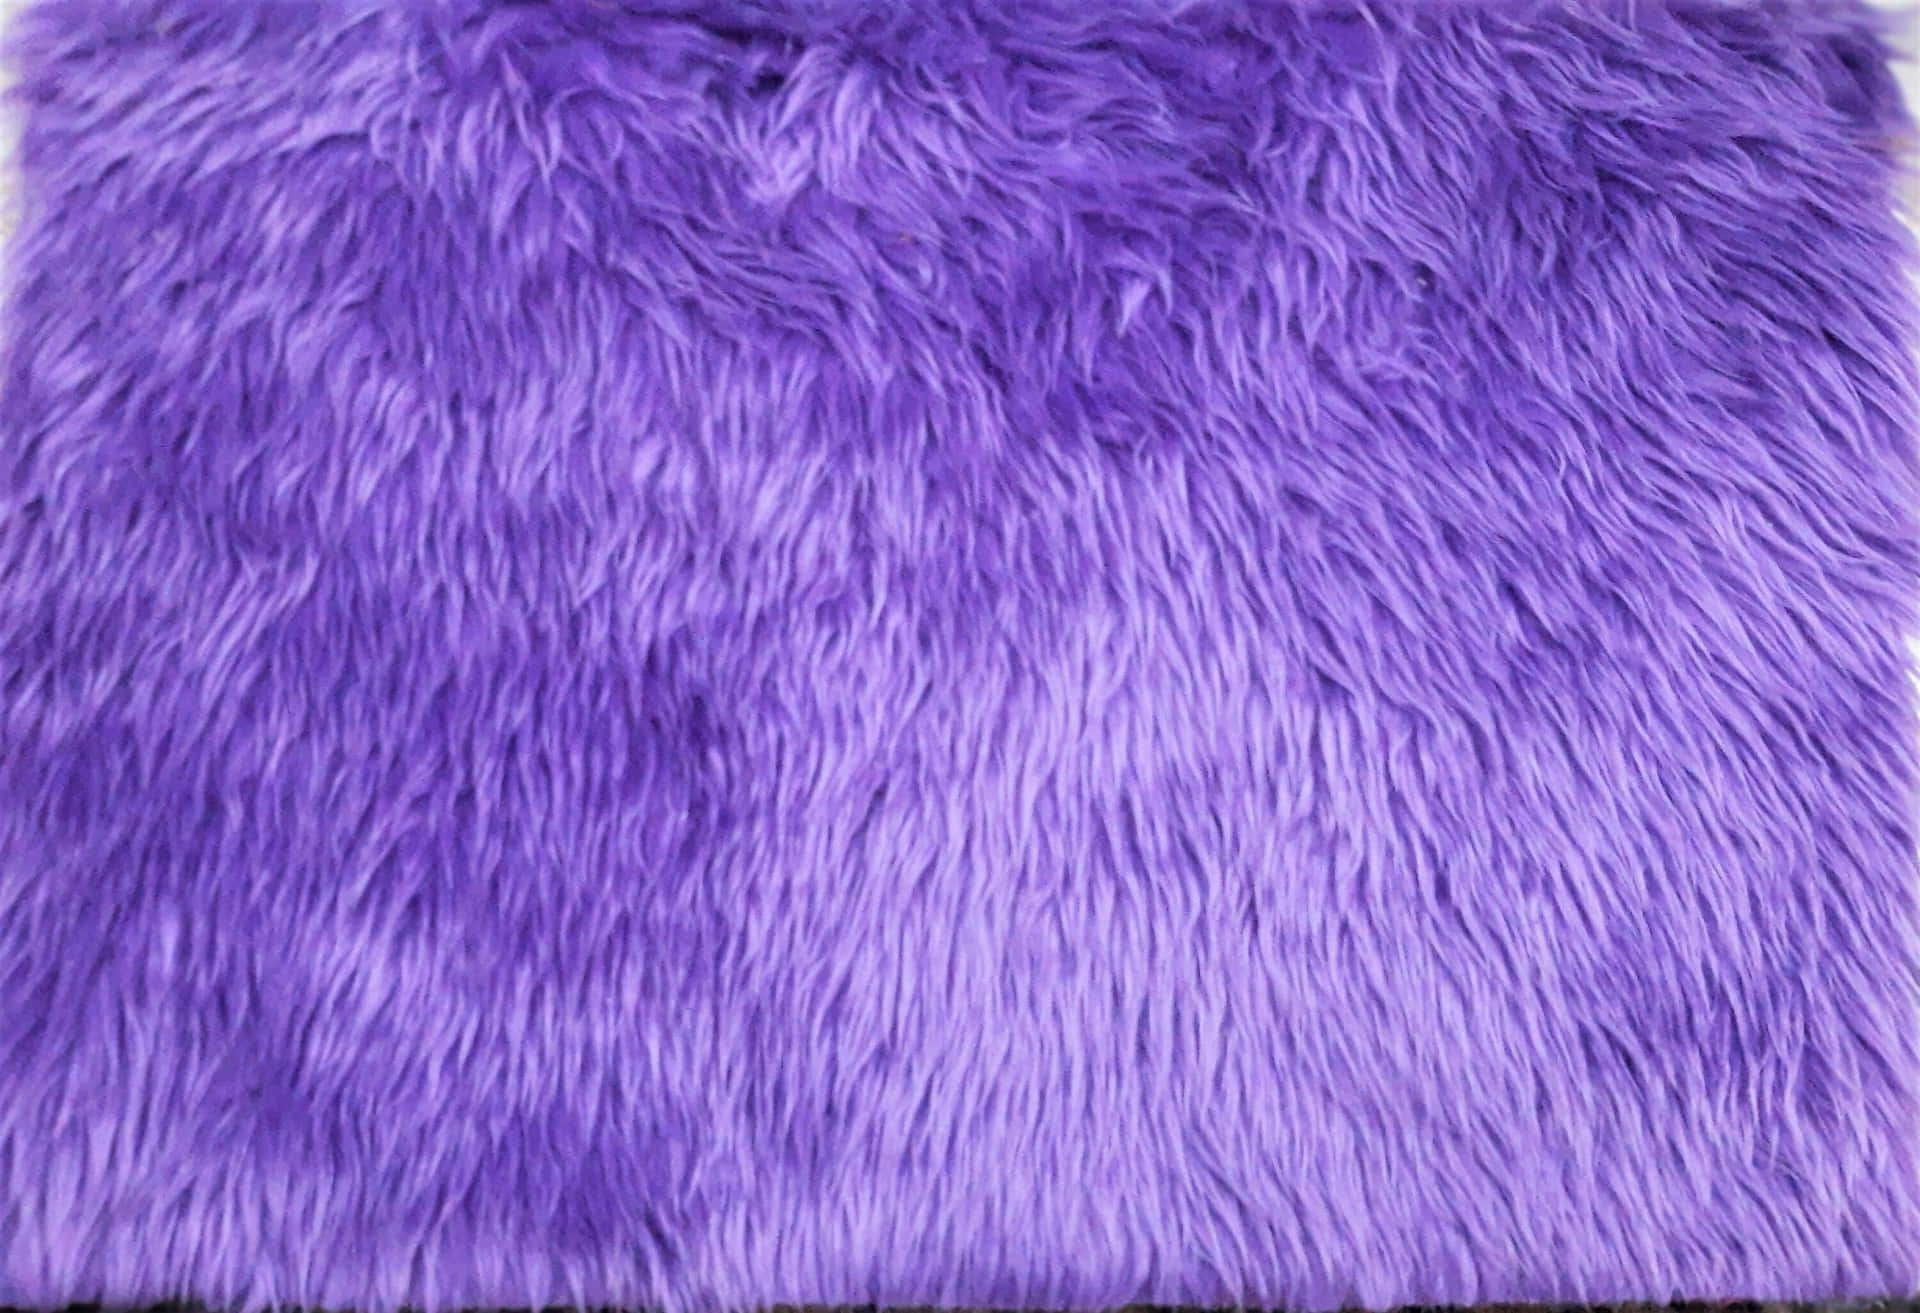 Stay Warm in Style With This Plush Purple Faux Fur Wallpaper